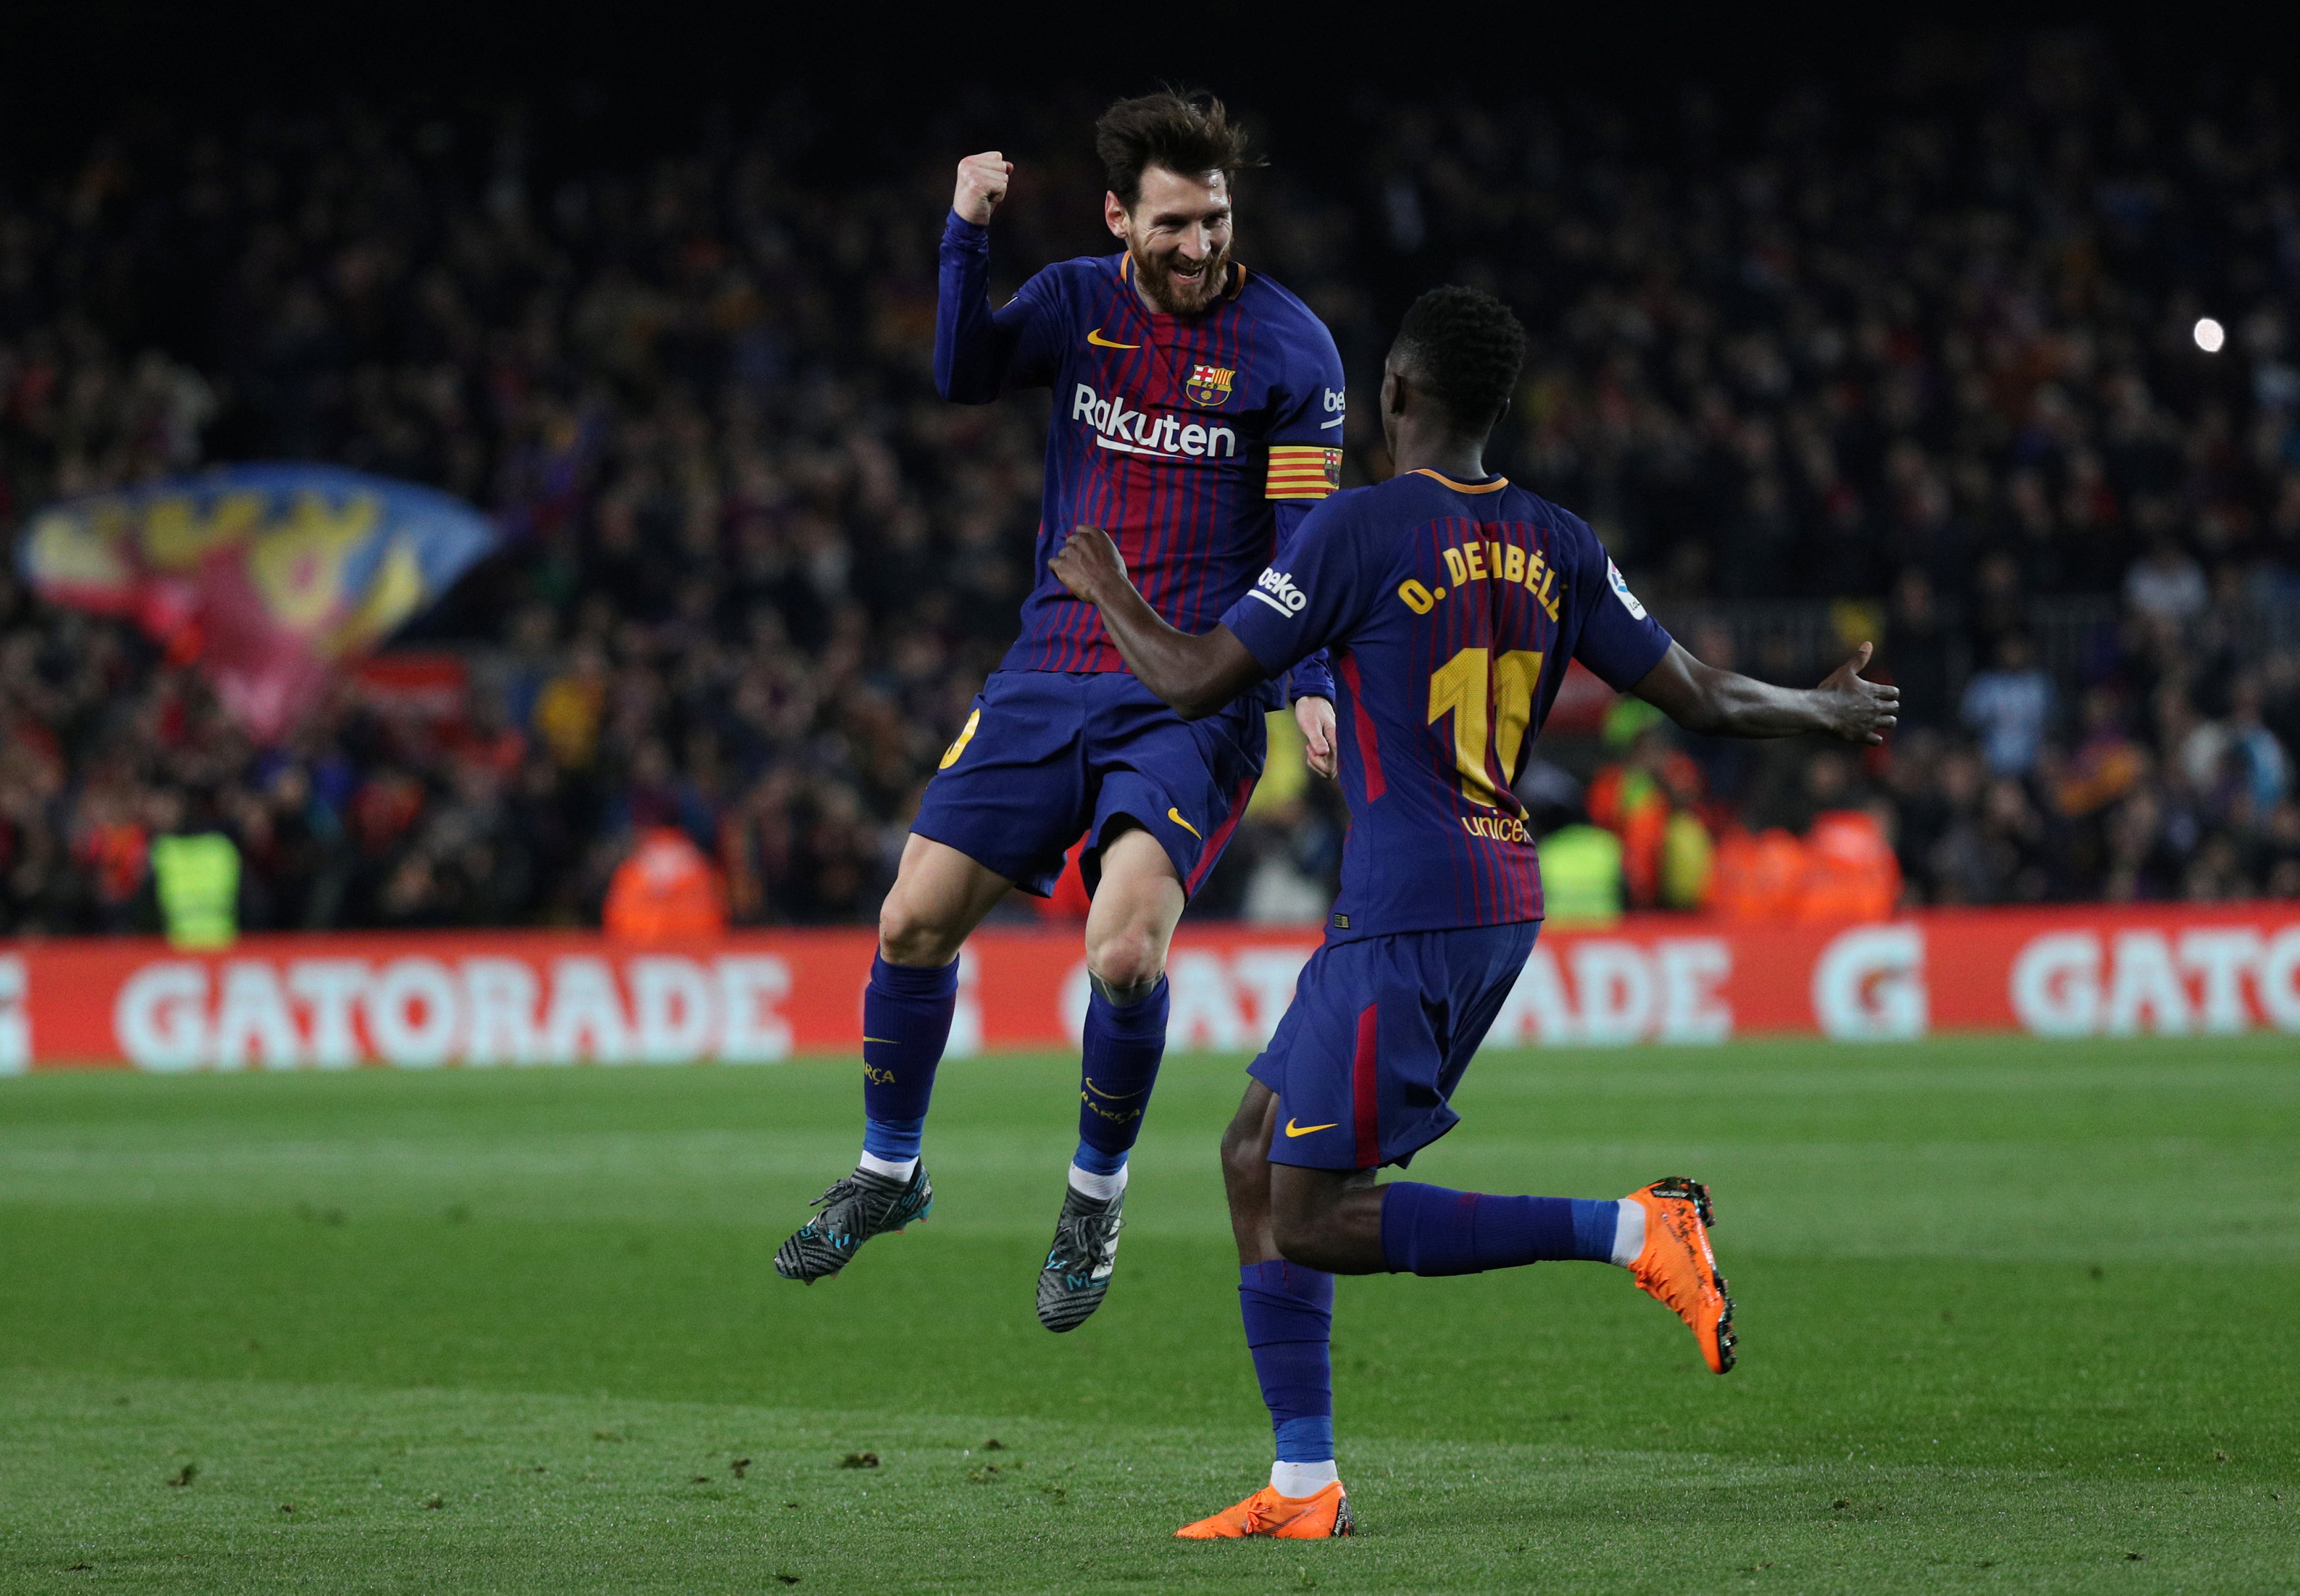 Football: Messi wows Barca team mates and coach with special free-kick